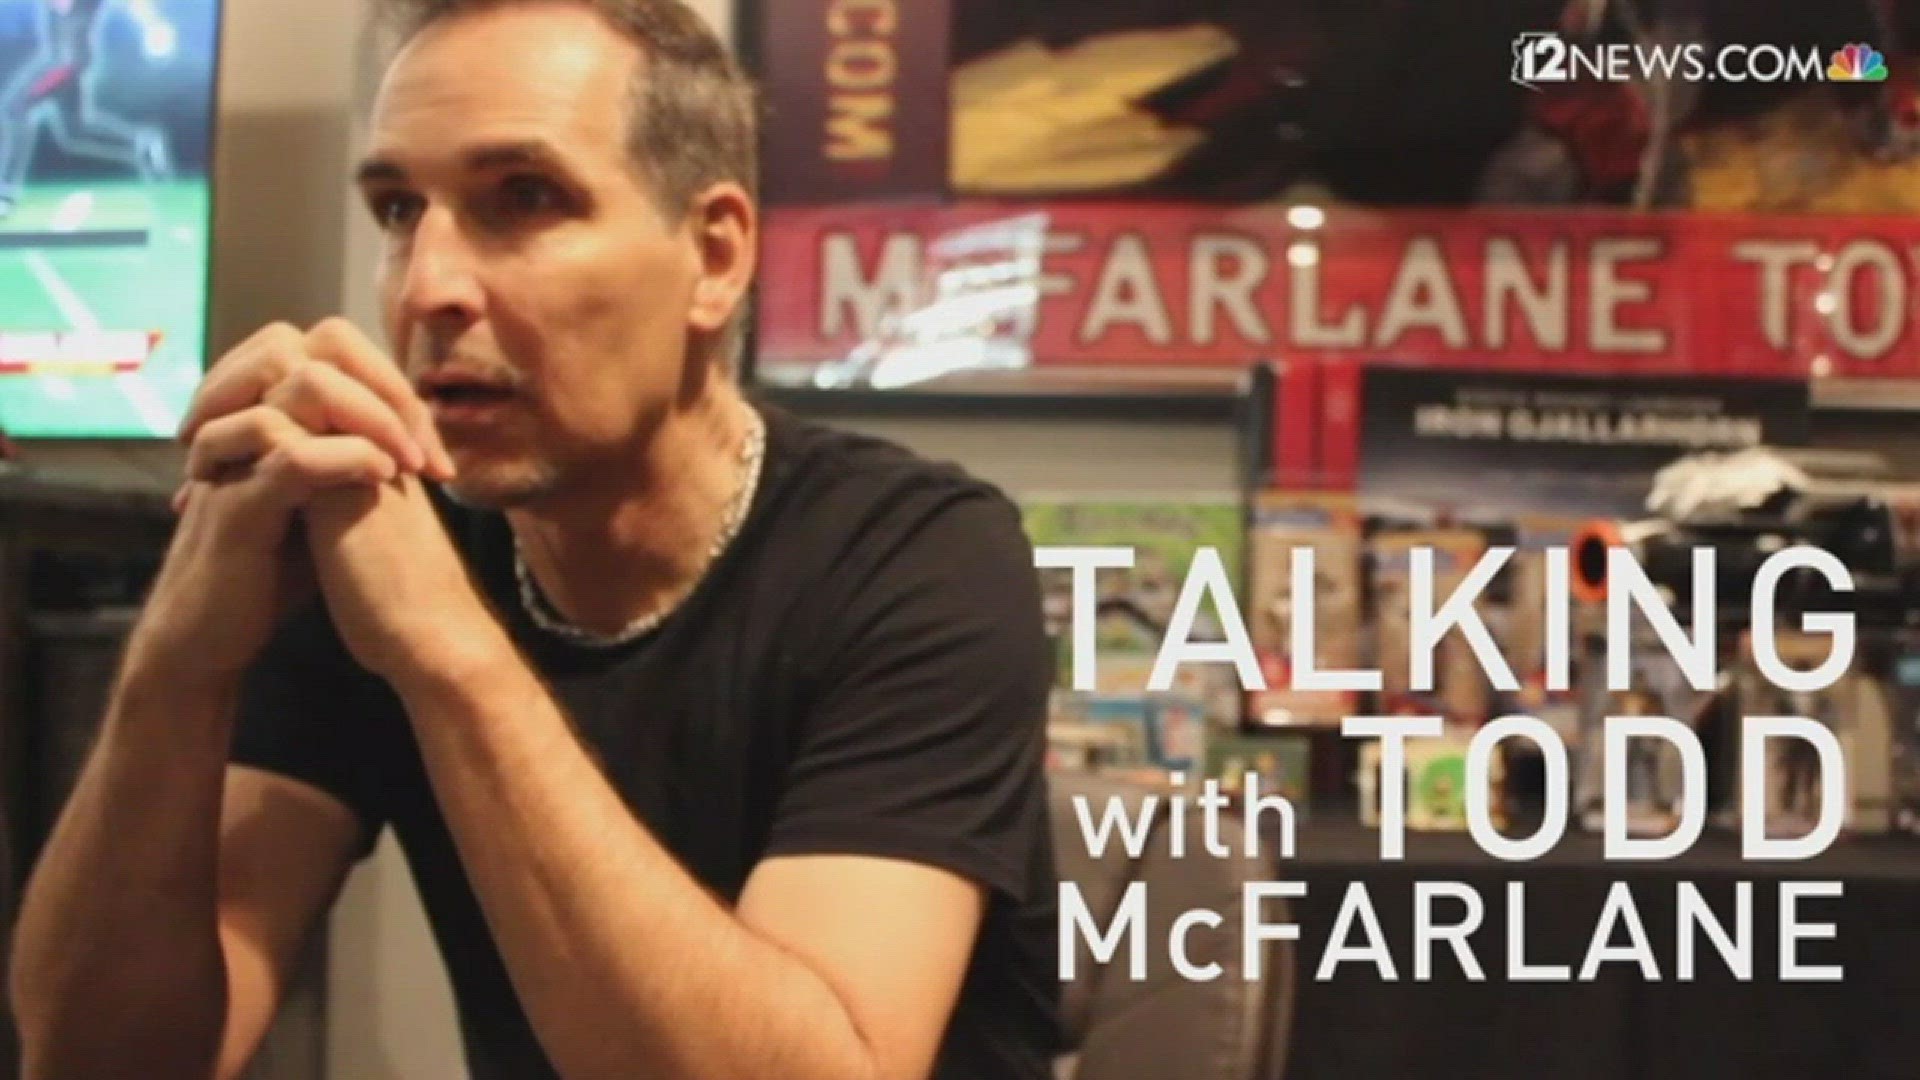 Comic book artist Todd McFarlane discusses his latest release of Arizona Cardinals action figures.